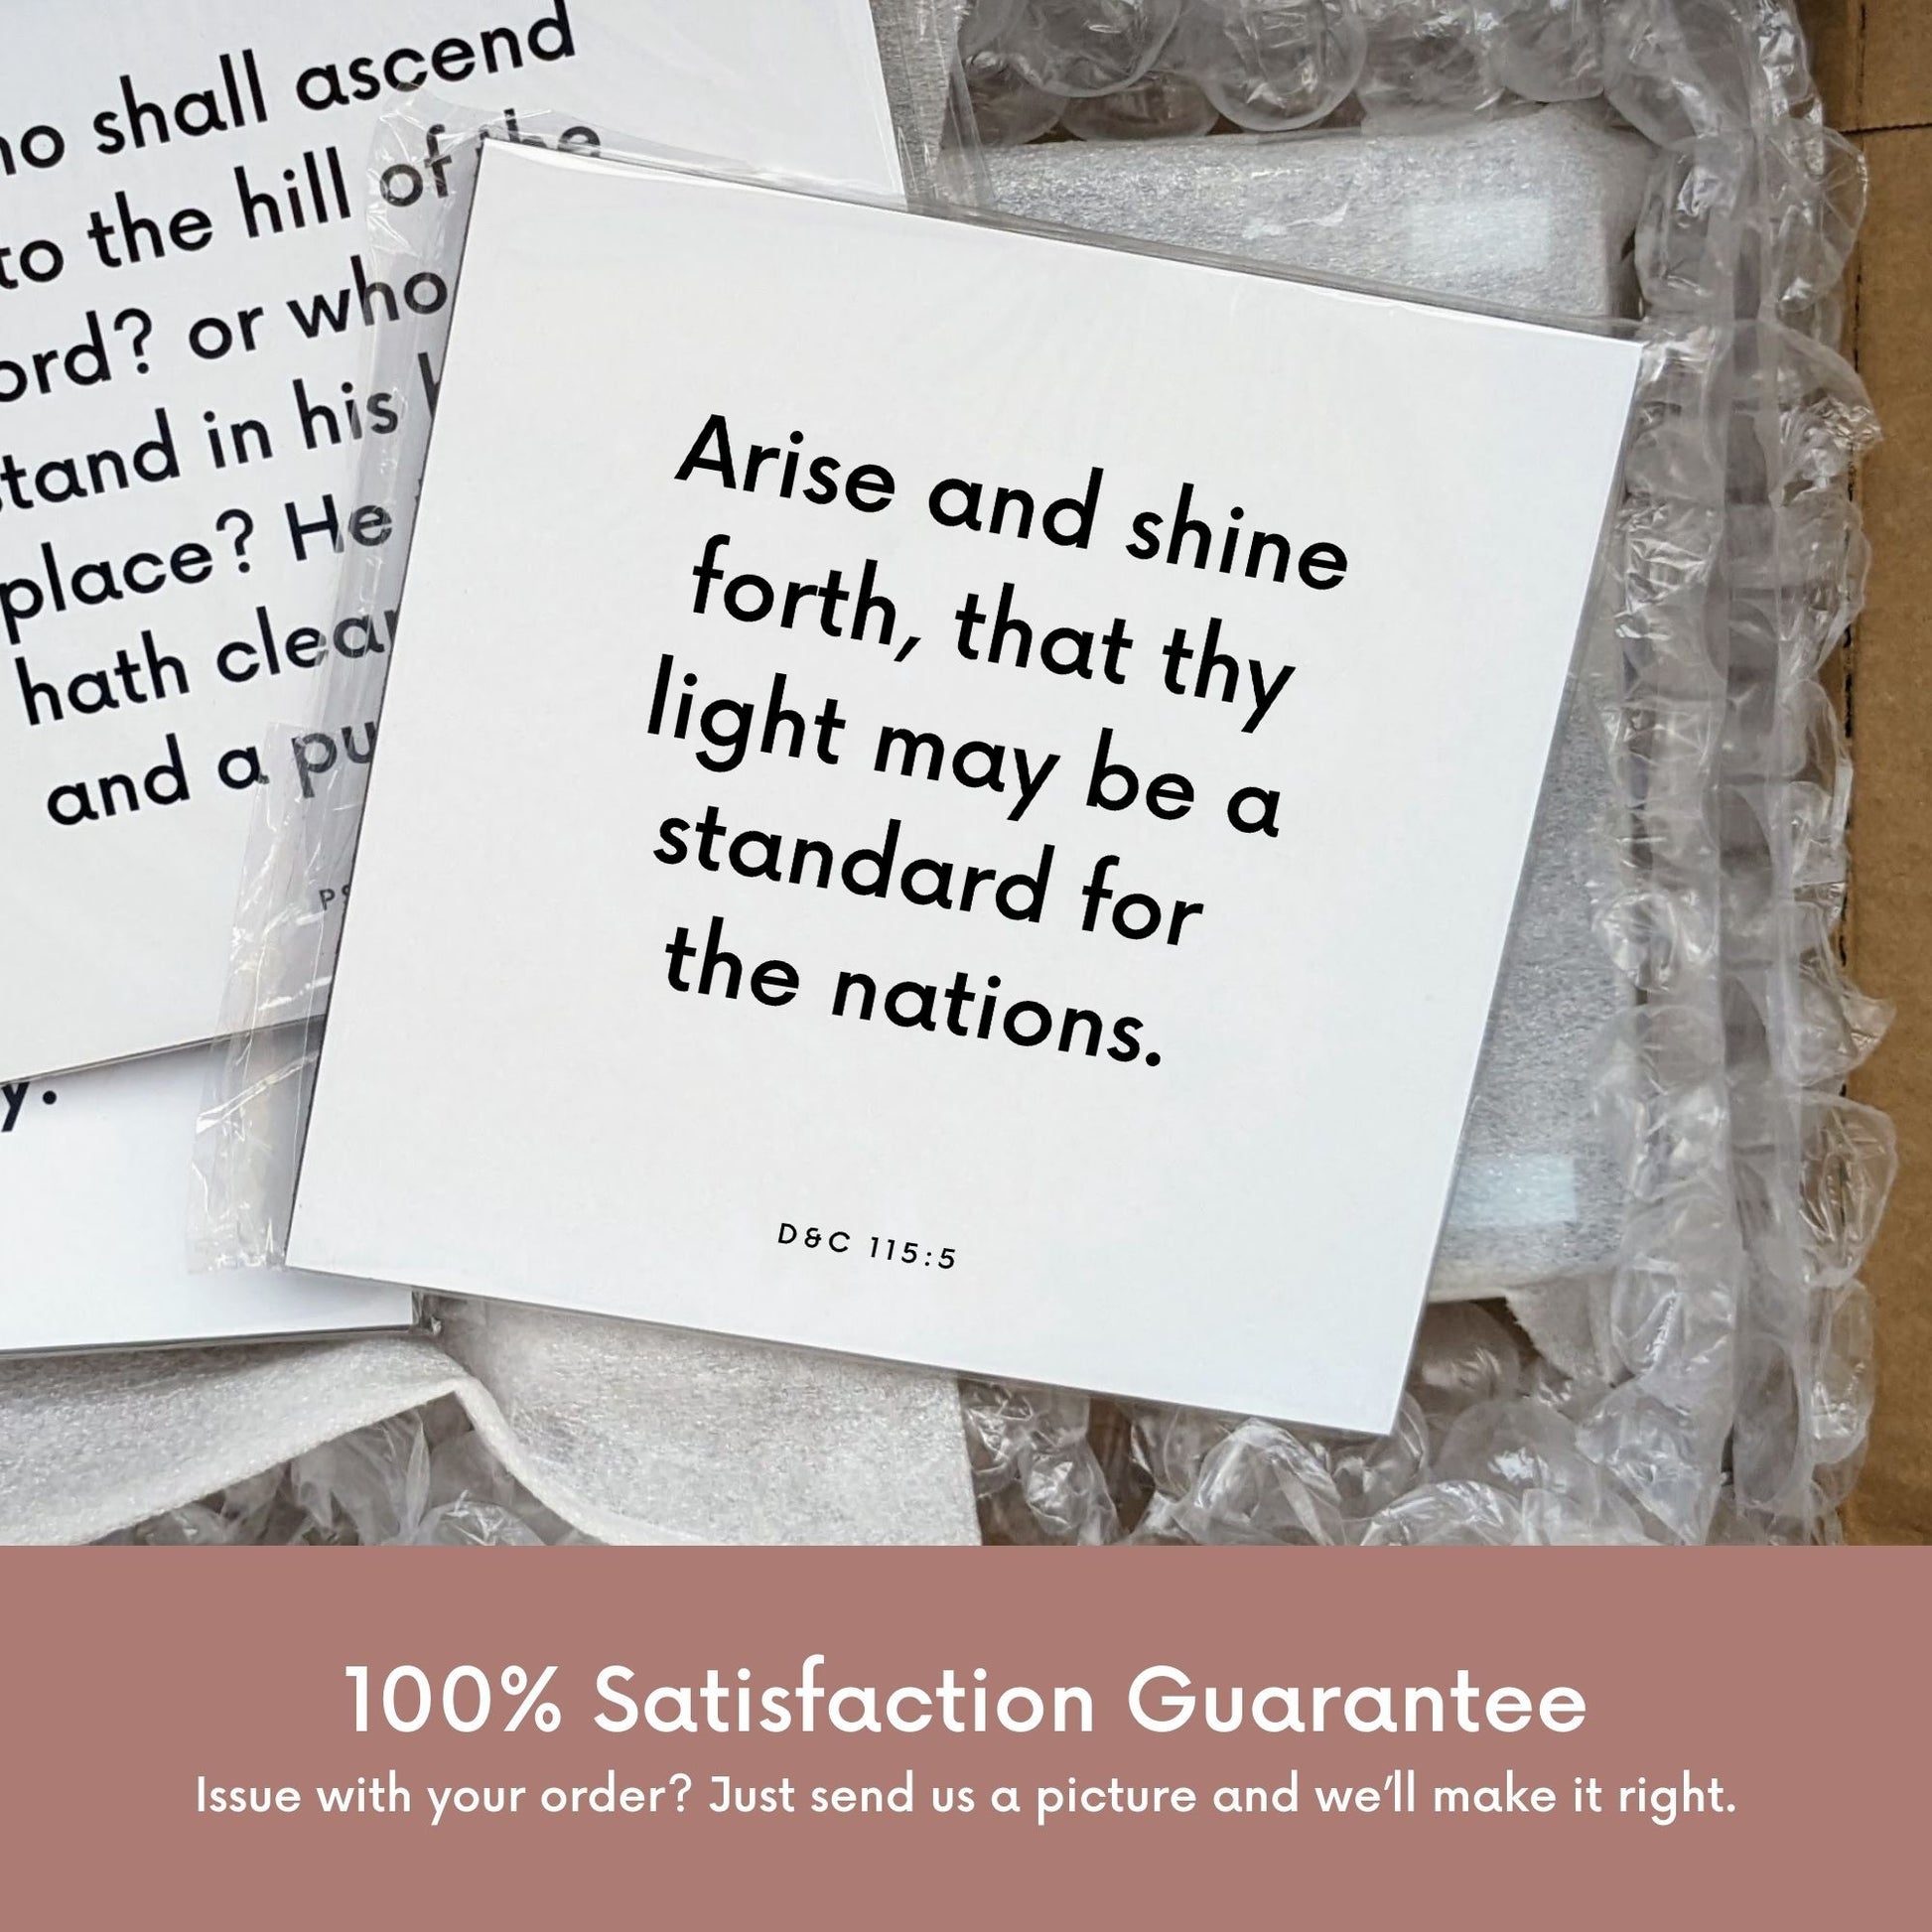 Shipping materials for scripture tile of D&C 115:5 - "Arise and shine forth, that thy light may be a standard"